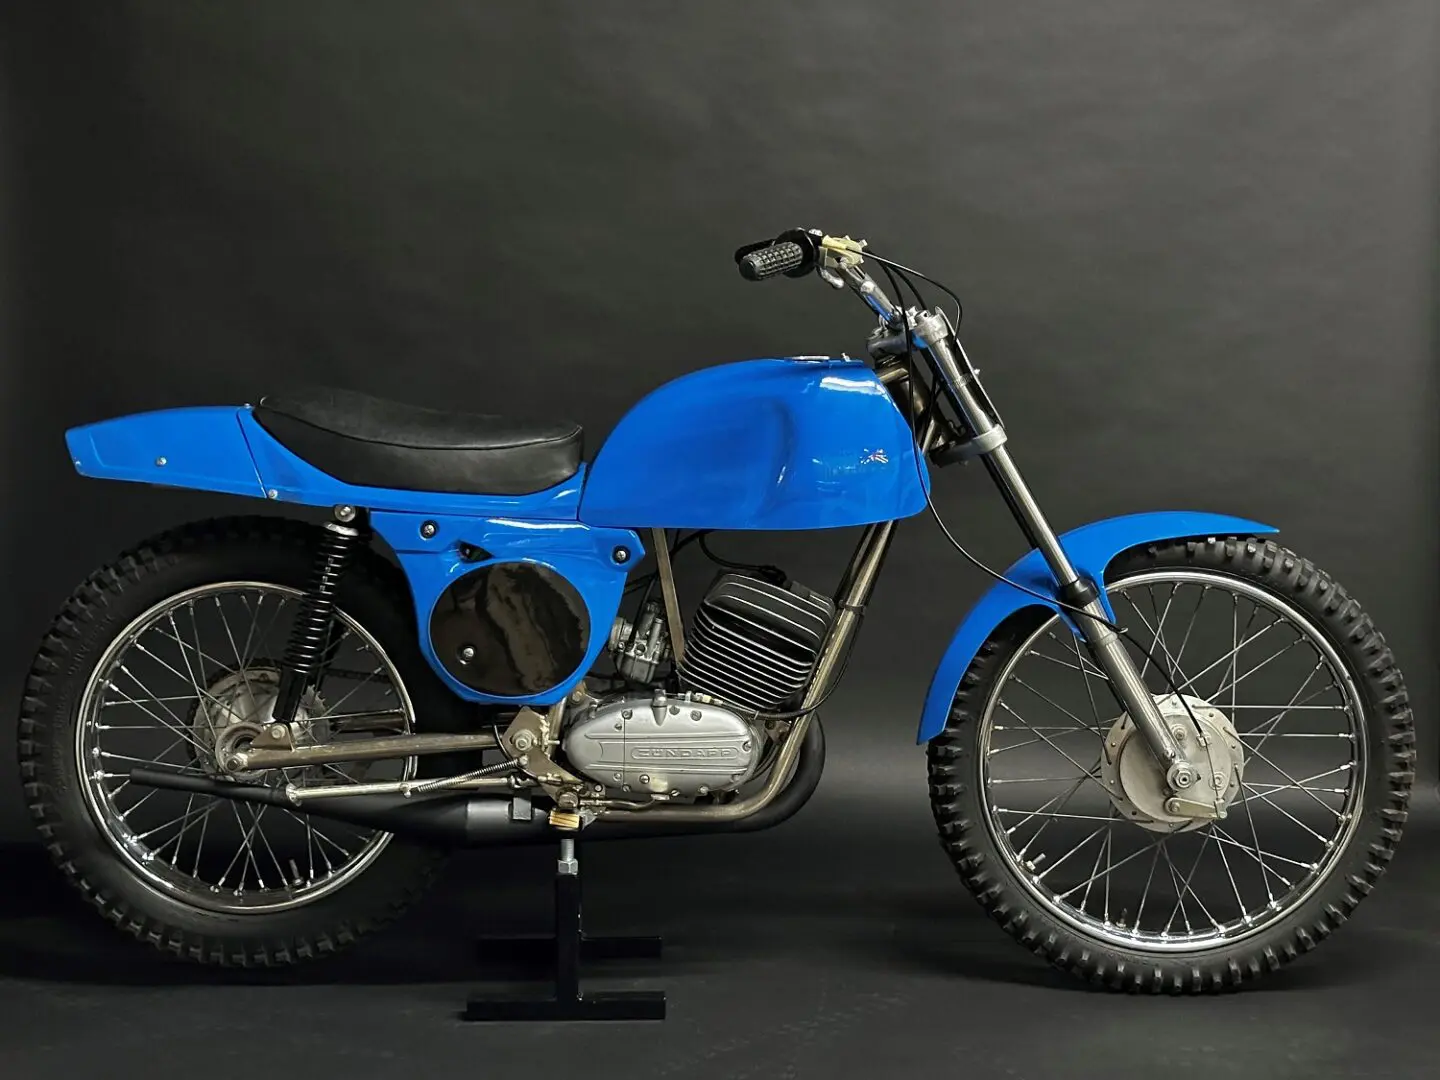 A Blue Color Bike With a Single Seat Image Right